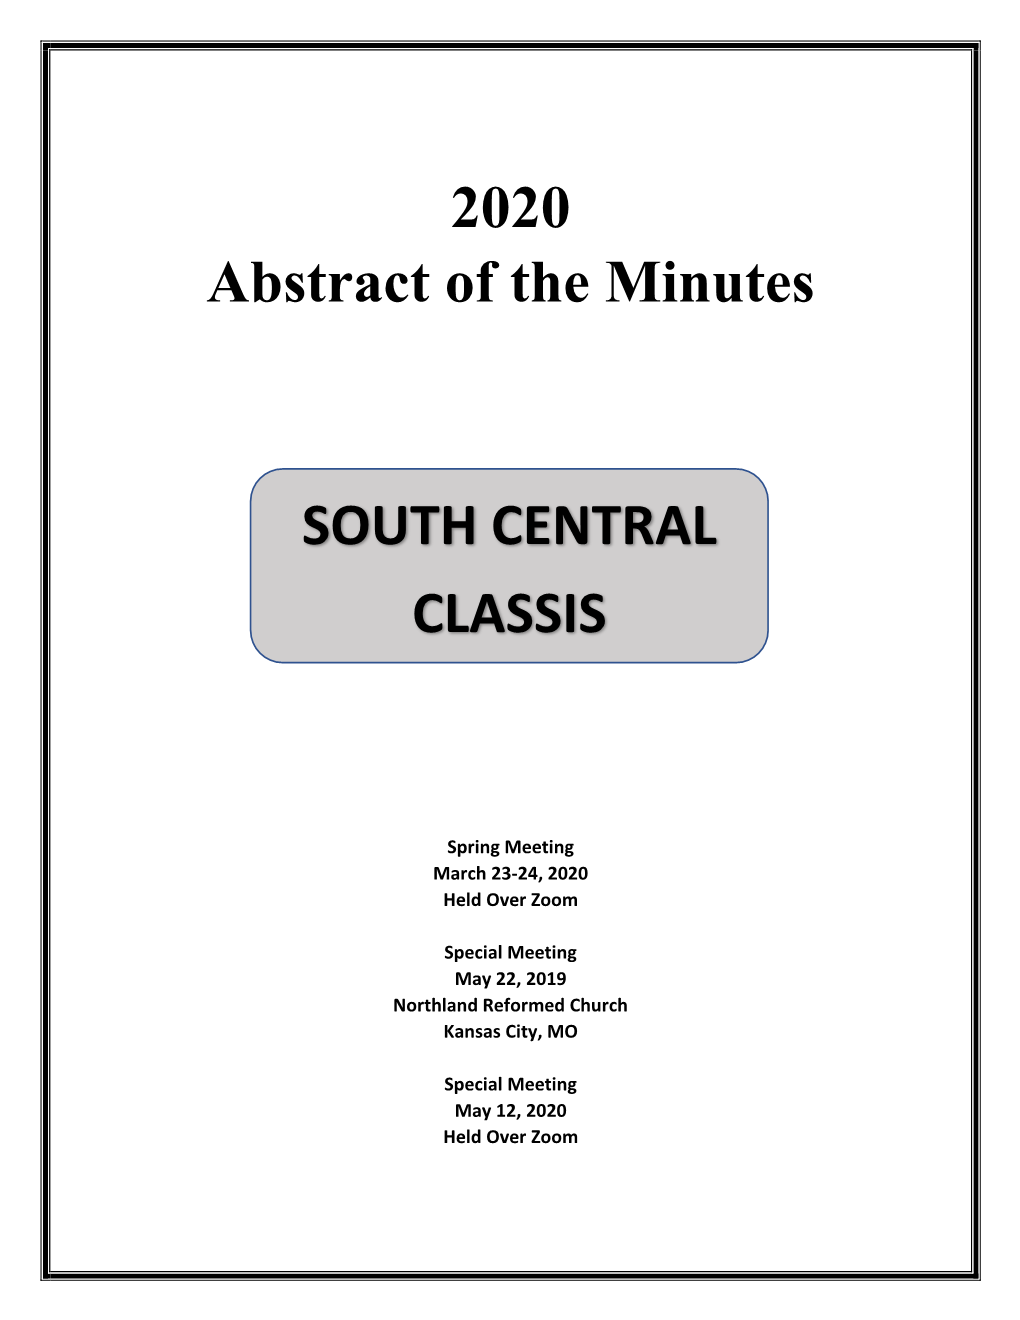 2020 Abstract of the Minutes SOUTH CENTRAL CLASSIS